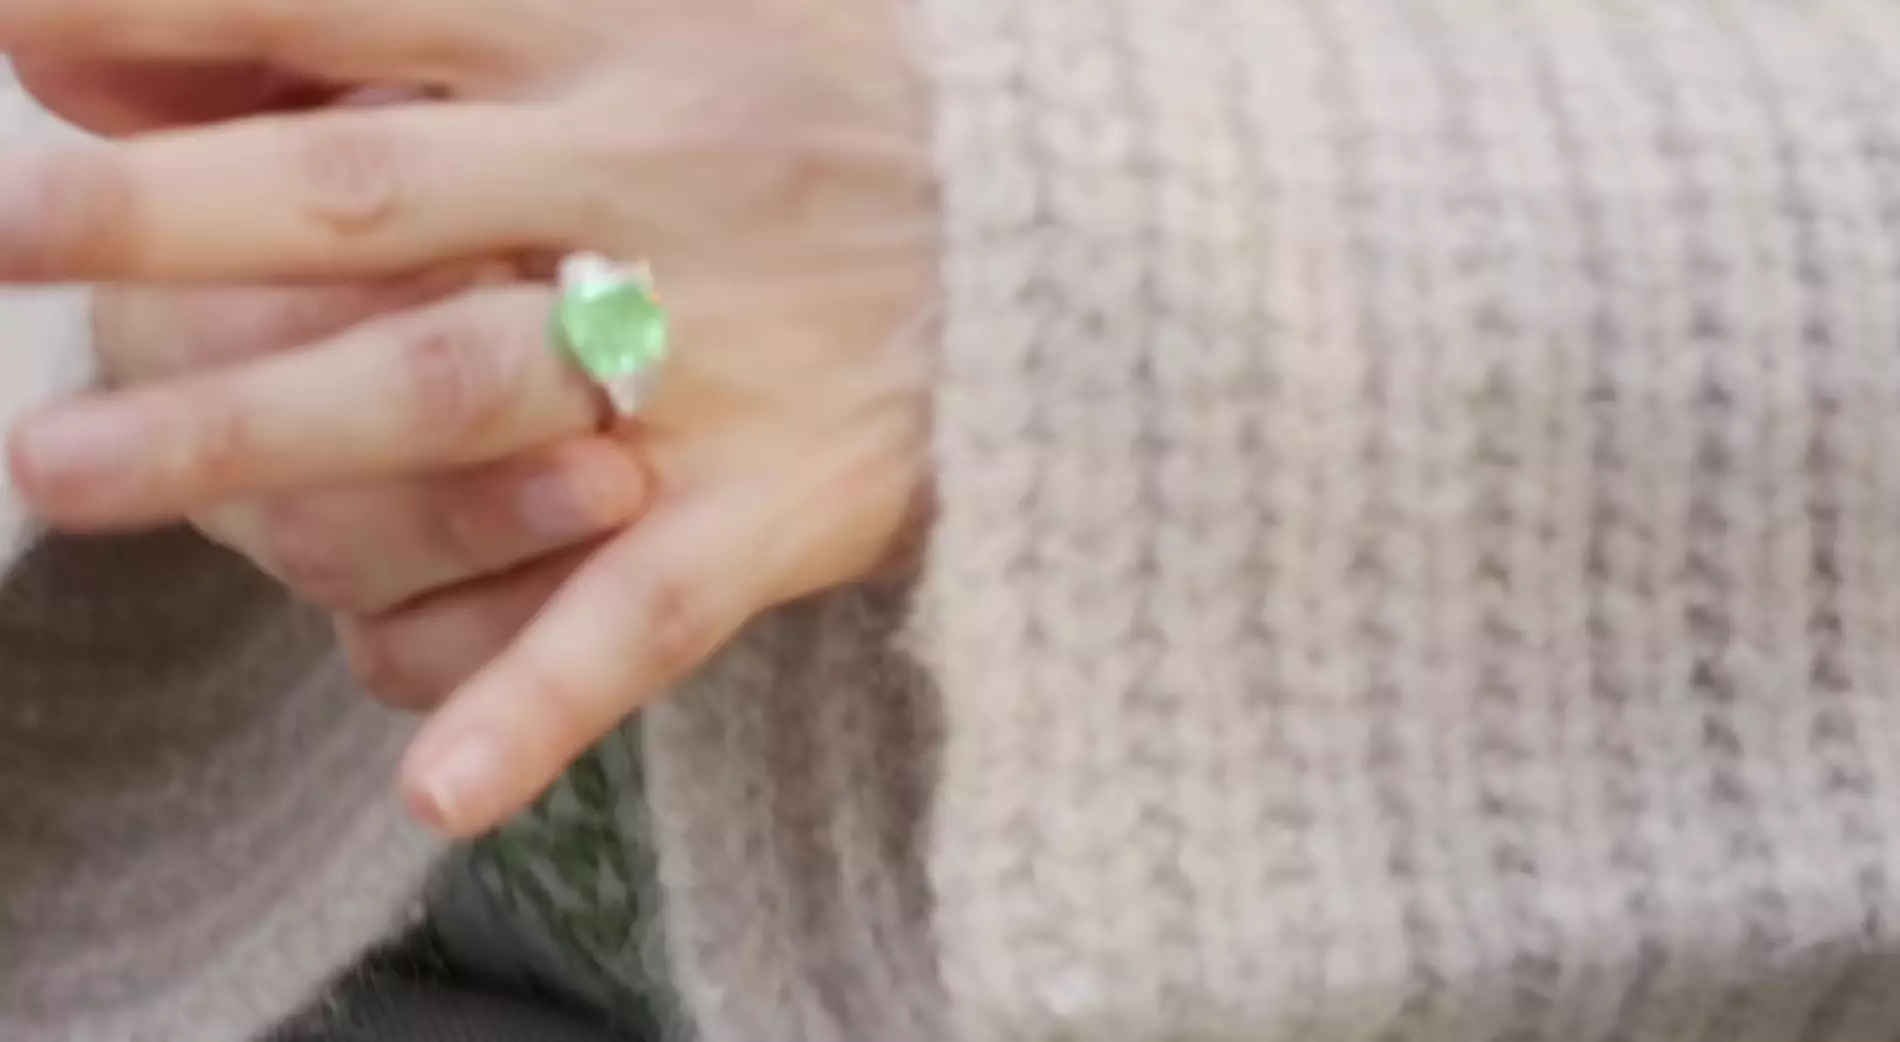 J.Lo's new engagement ring is green. (